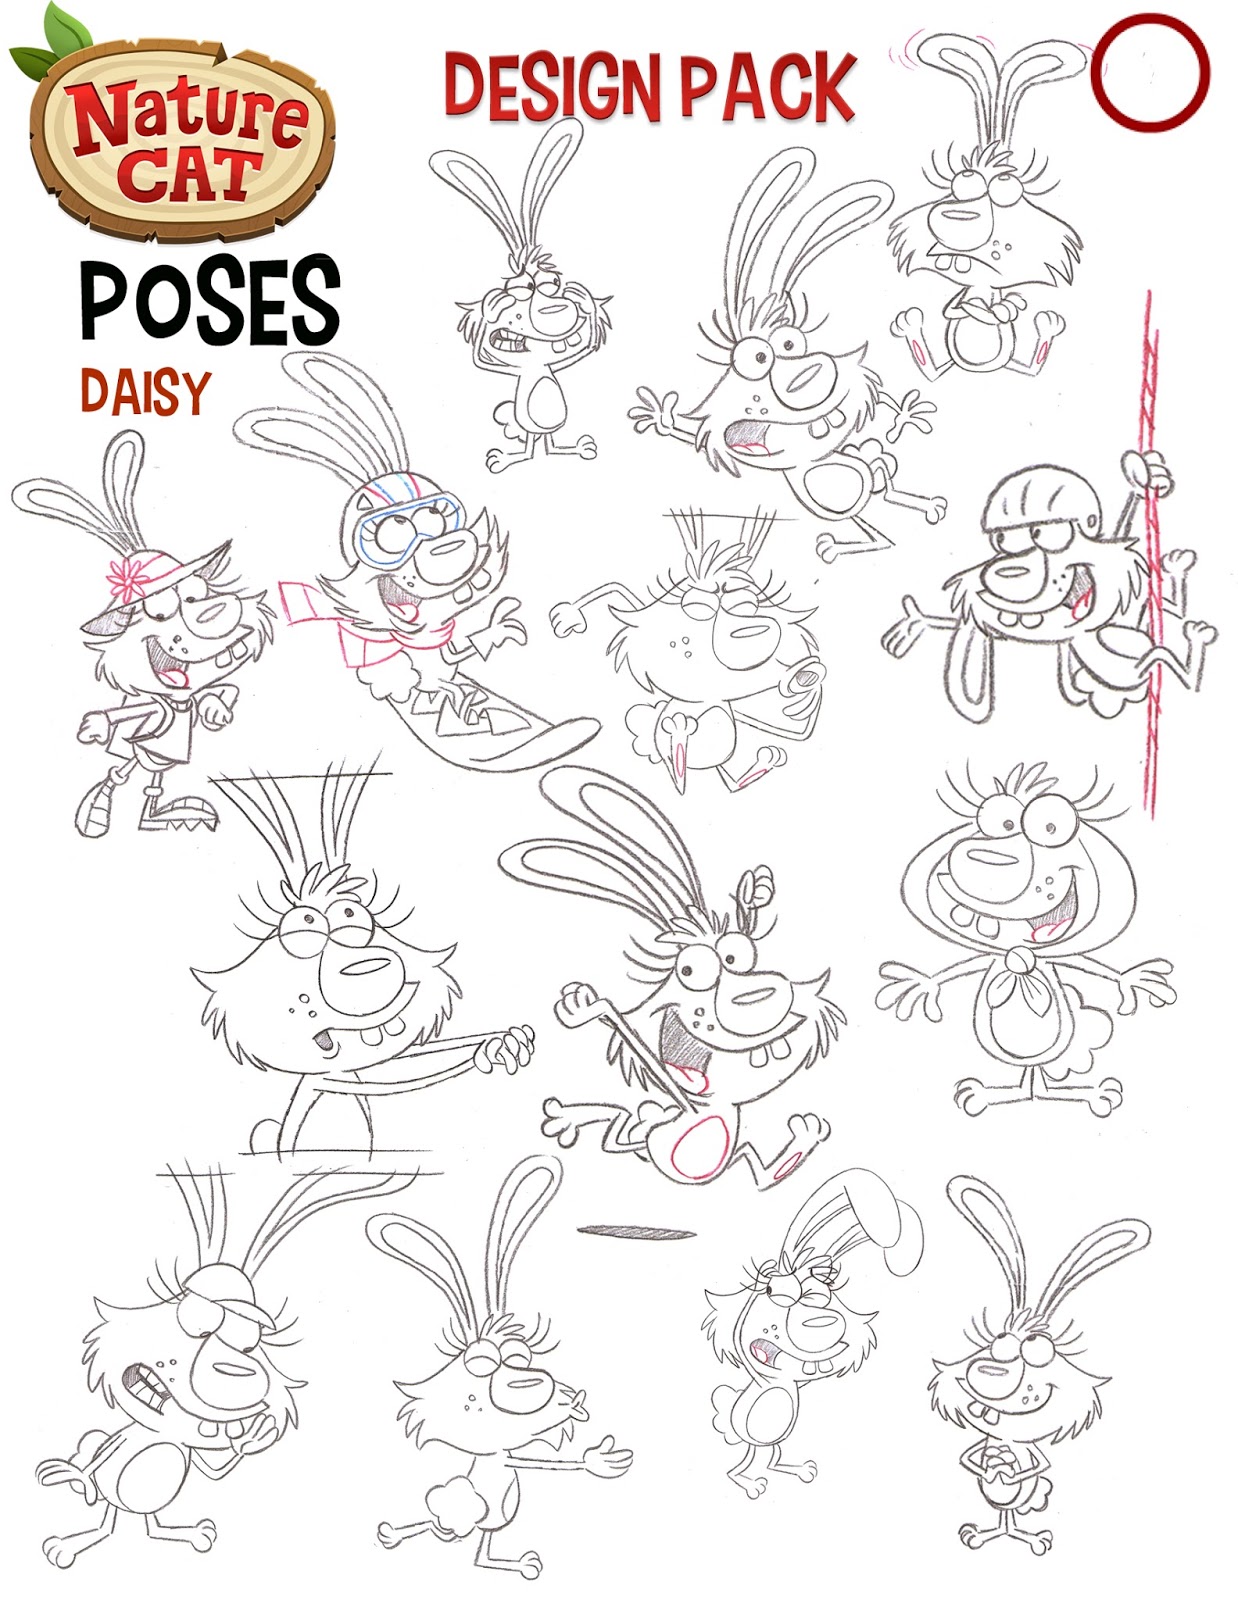 Dave MacDougall: NATURE CAT STYLE GUIDE POSE SHEETS